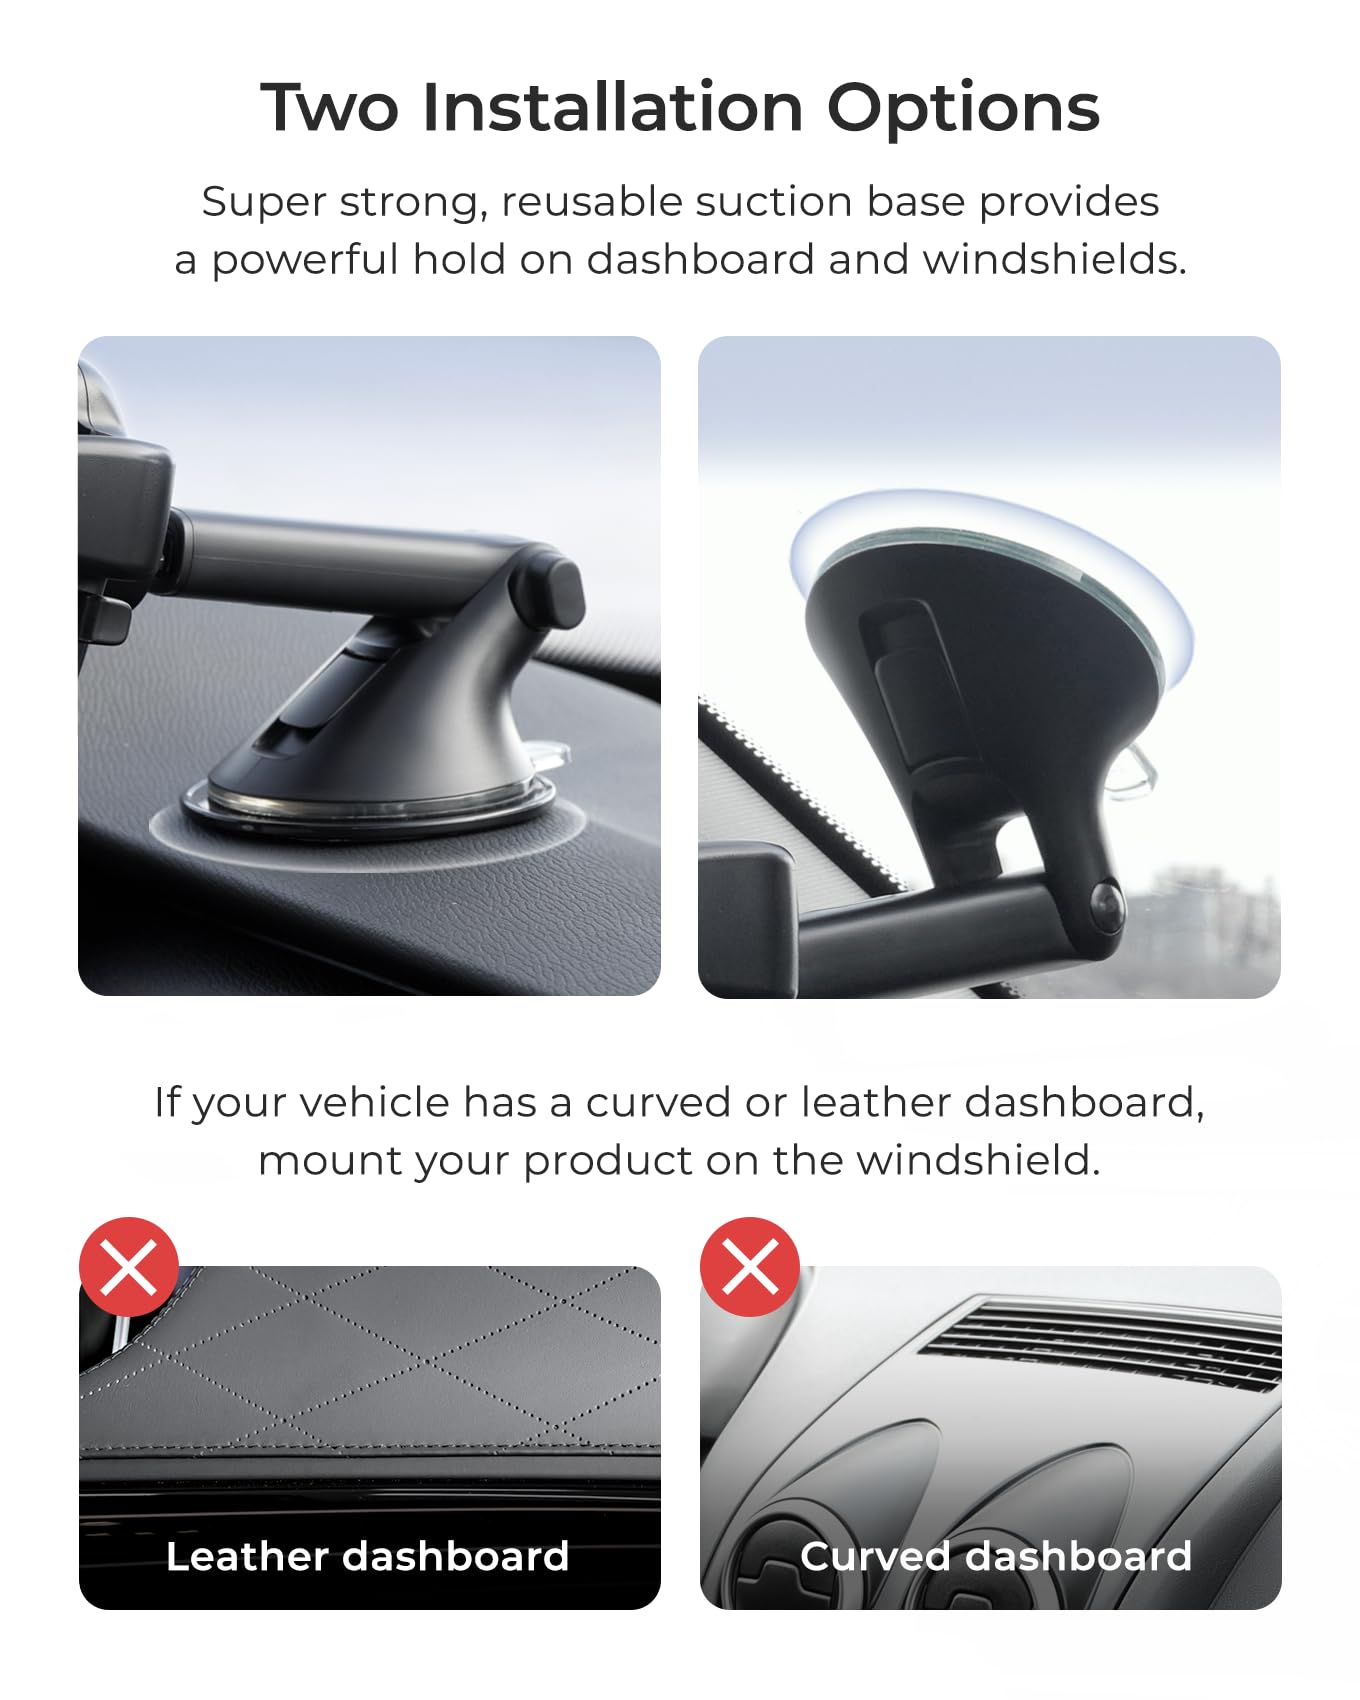 iOttie Easy One Touch 6 Universal Car Mount Dashboard & Windshield Suction Cup Phone Holder for iPhone Samsung, Google, All Smartphones